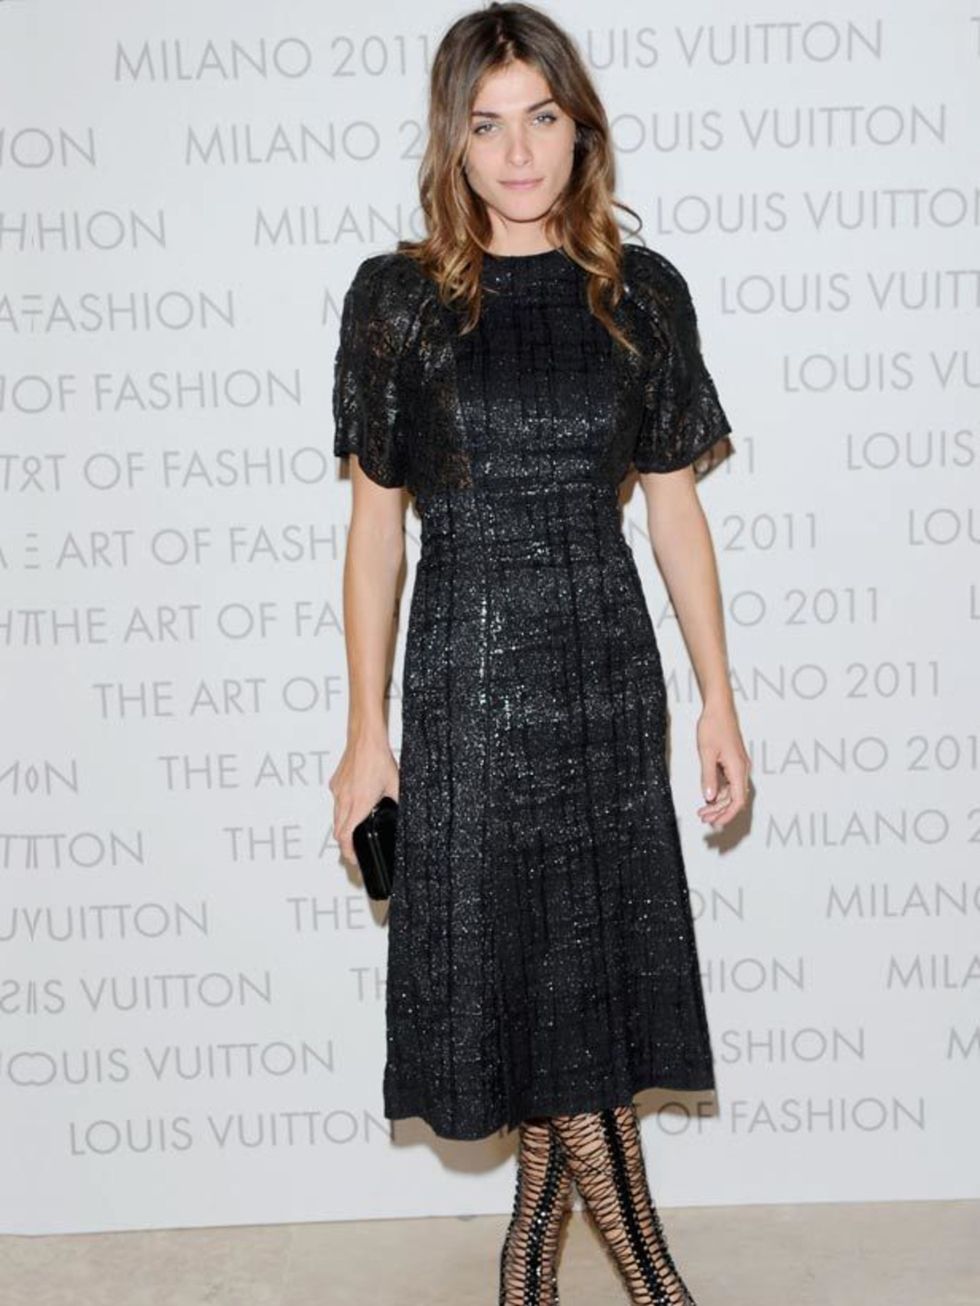 <p>Franca Sozzani attends the opening of Louis Vuitton's The Art of Fashion Exhibition at Milan Fashion Week, 21 September 2011</p>